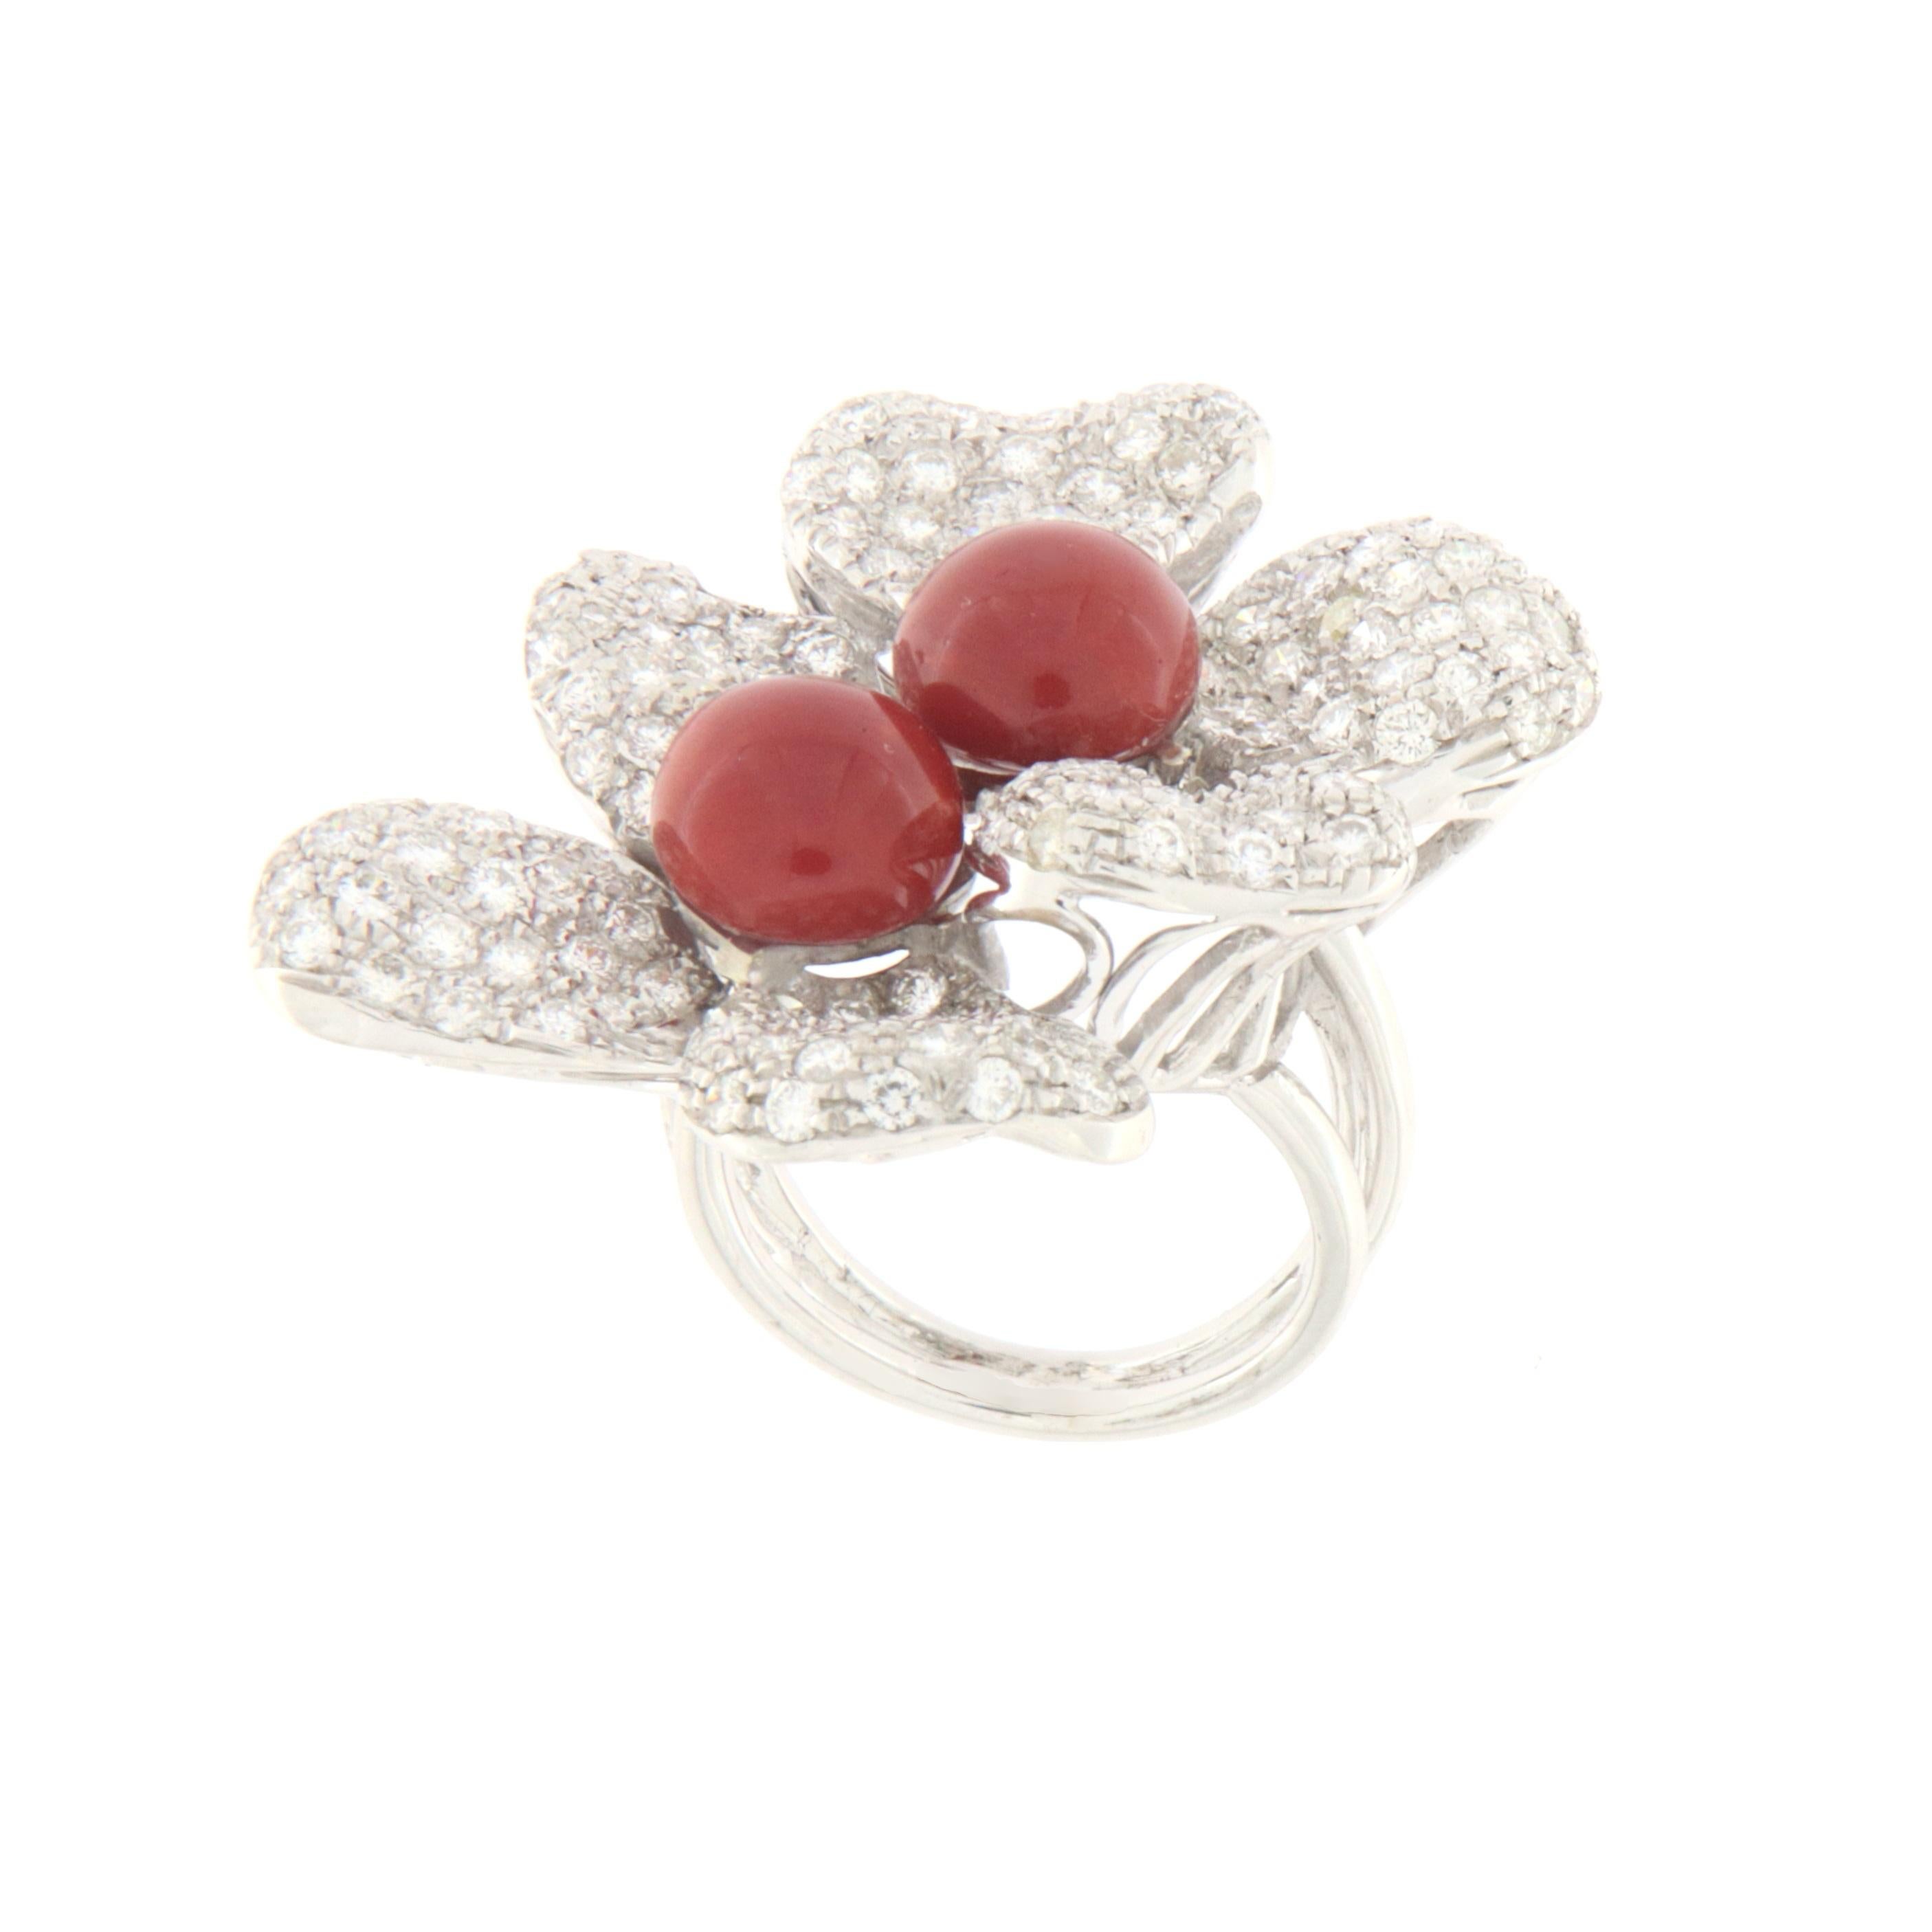 18 karat white gold cocktail ring.Handmade by our artisans assembled with natural sardinian coral and diamonds

Ring weight 16.10 grams
Diamonds weight 3.05 karat
Coral weight 2 grams
Ring size 7 US 14 ITA 
(all rings are can be resized)